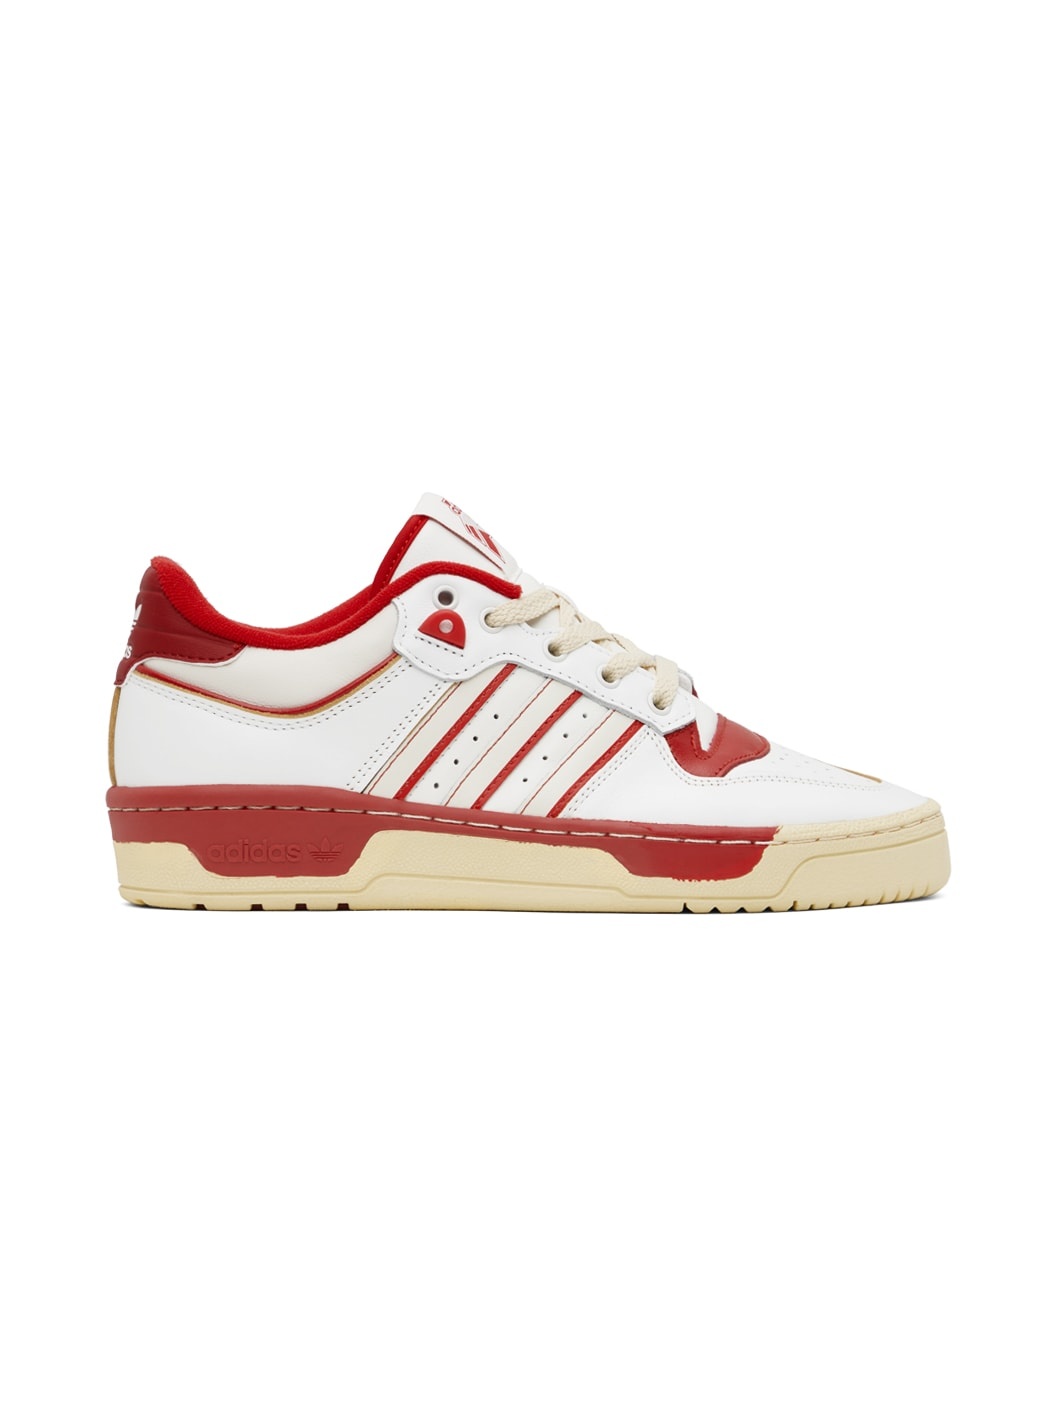 White & Red Rivalry Low 86 Sneakers - 1